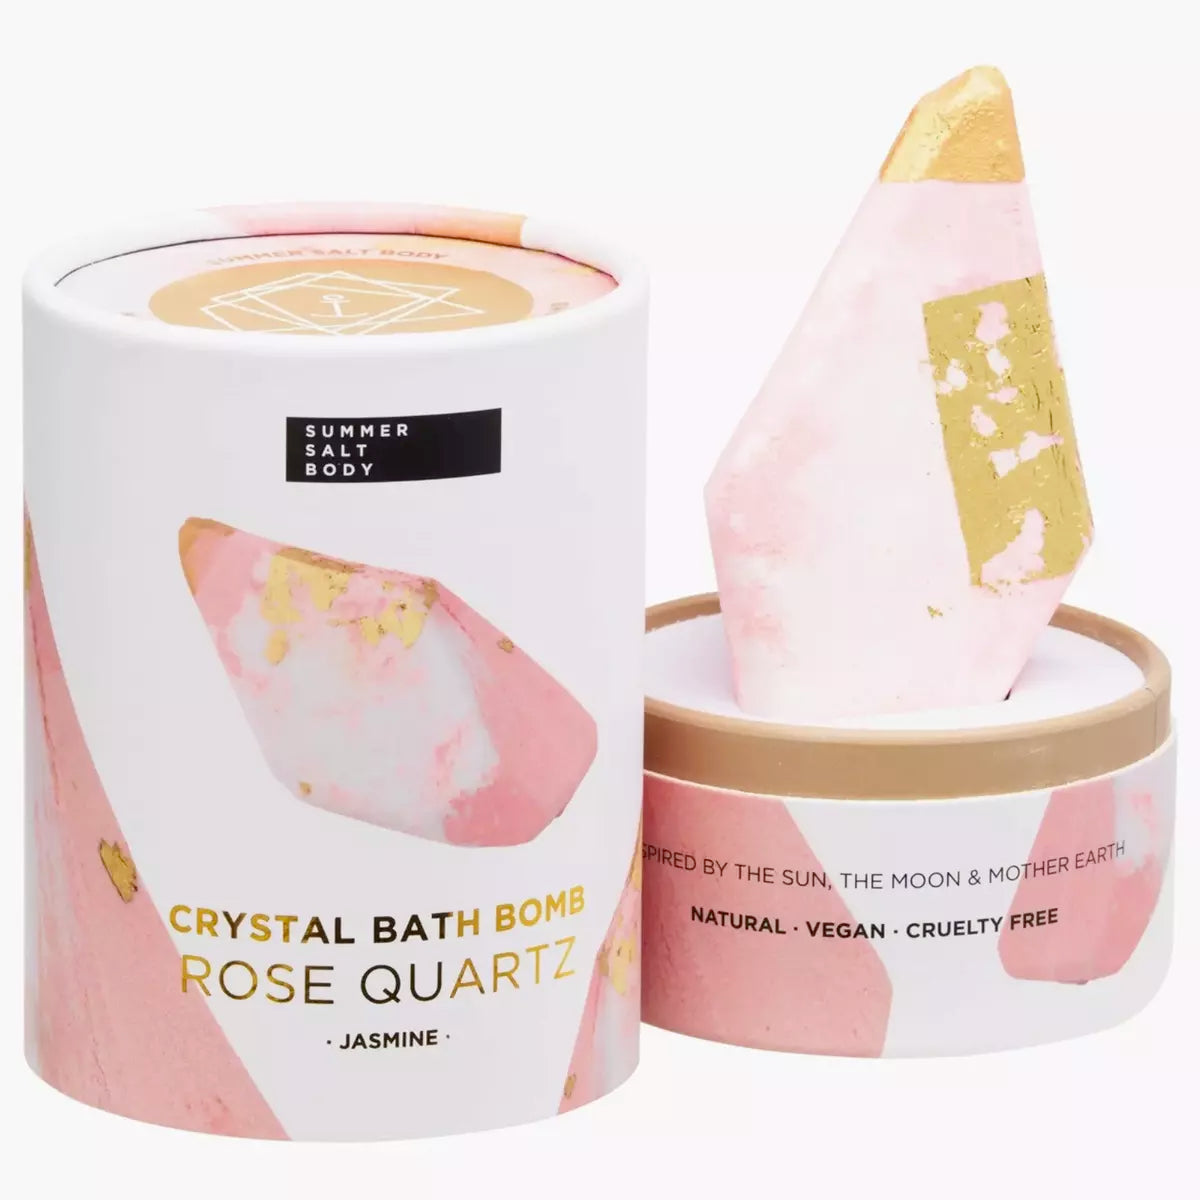 Experience a luxurious spa treatment with our Crystal Bath Bomb - Rose Quartz - Jasmine from Summer Salt Body. Enjoy the soothing effects as the bath bomb dissolves, releasing the beautiful rose quartz crystals.